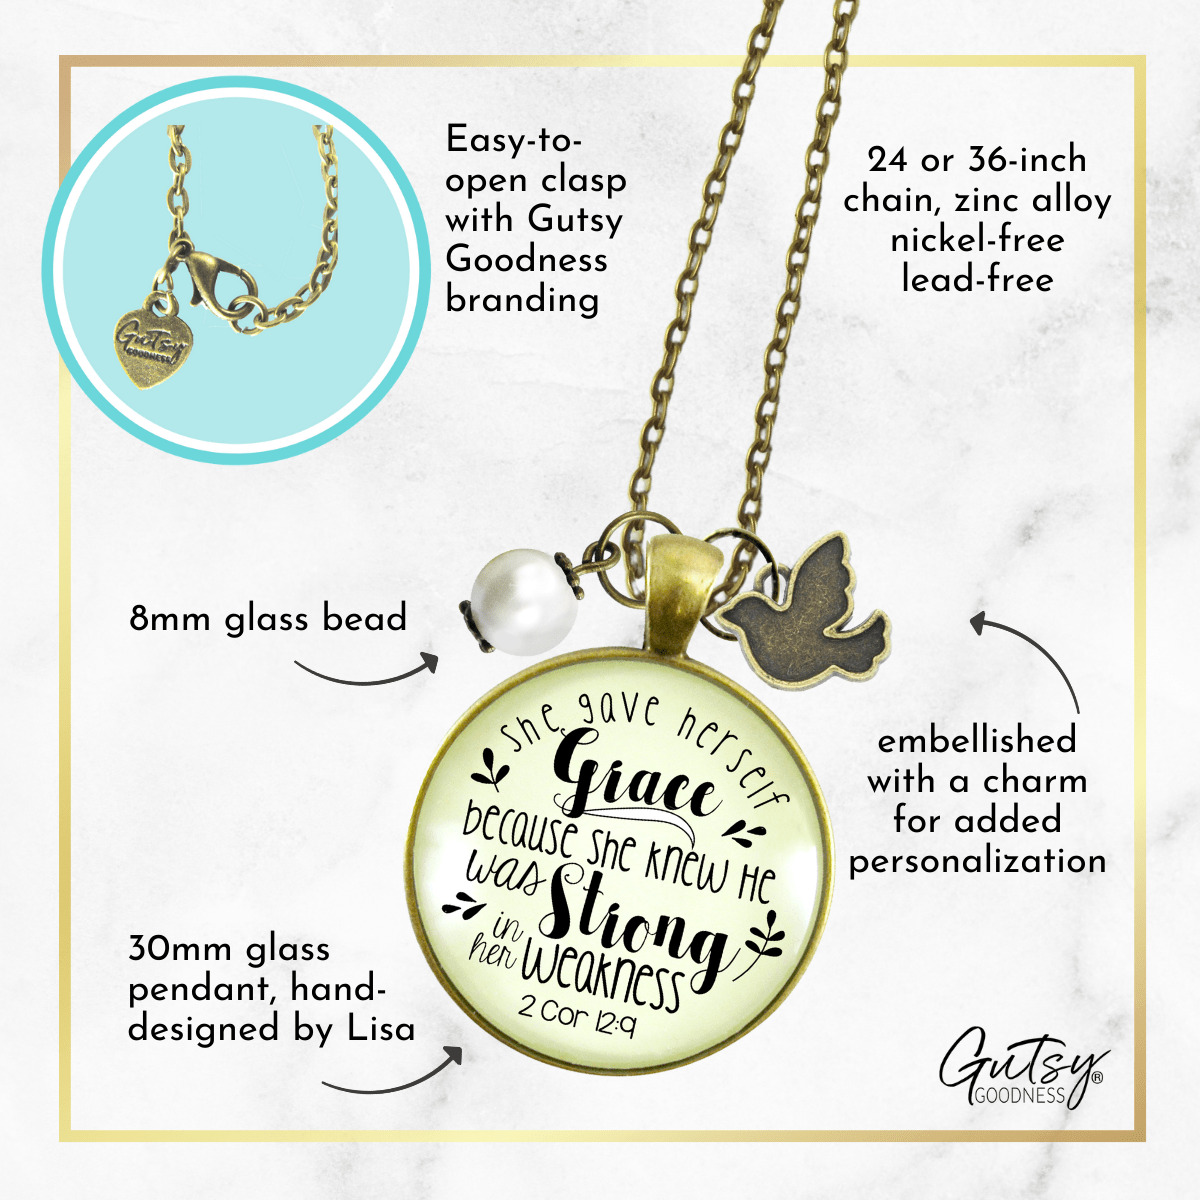 Gutsy Goodness She Gave Herself Grace Christian Necklace Bible Quote Dove Jewelry - Gutsy Goodness Handmade Jewelry;She Gave Herself Grace Christian Necklace Bible Quote Dove Jewelry - Gutsy Goodness Handmade Jewelry Gifts